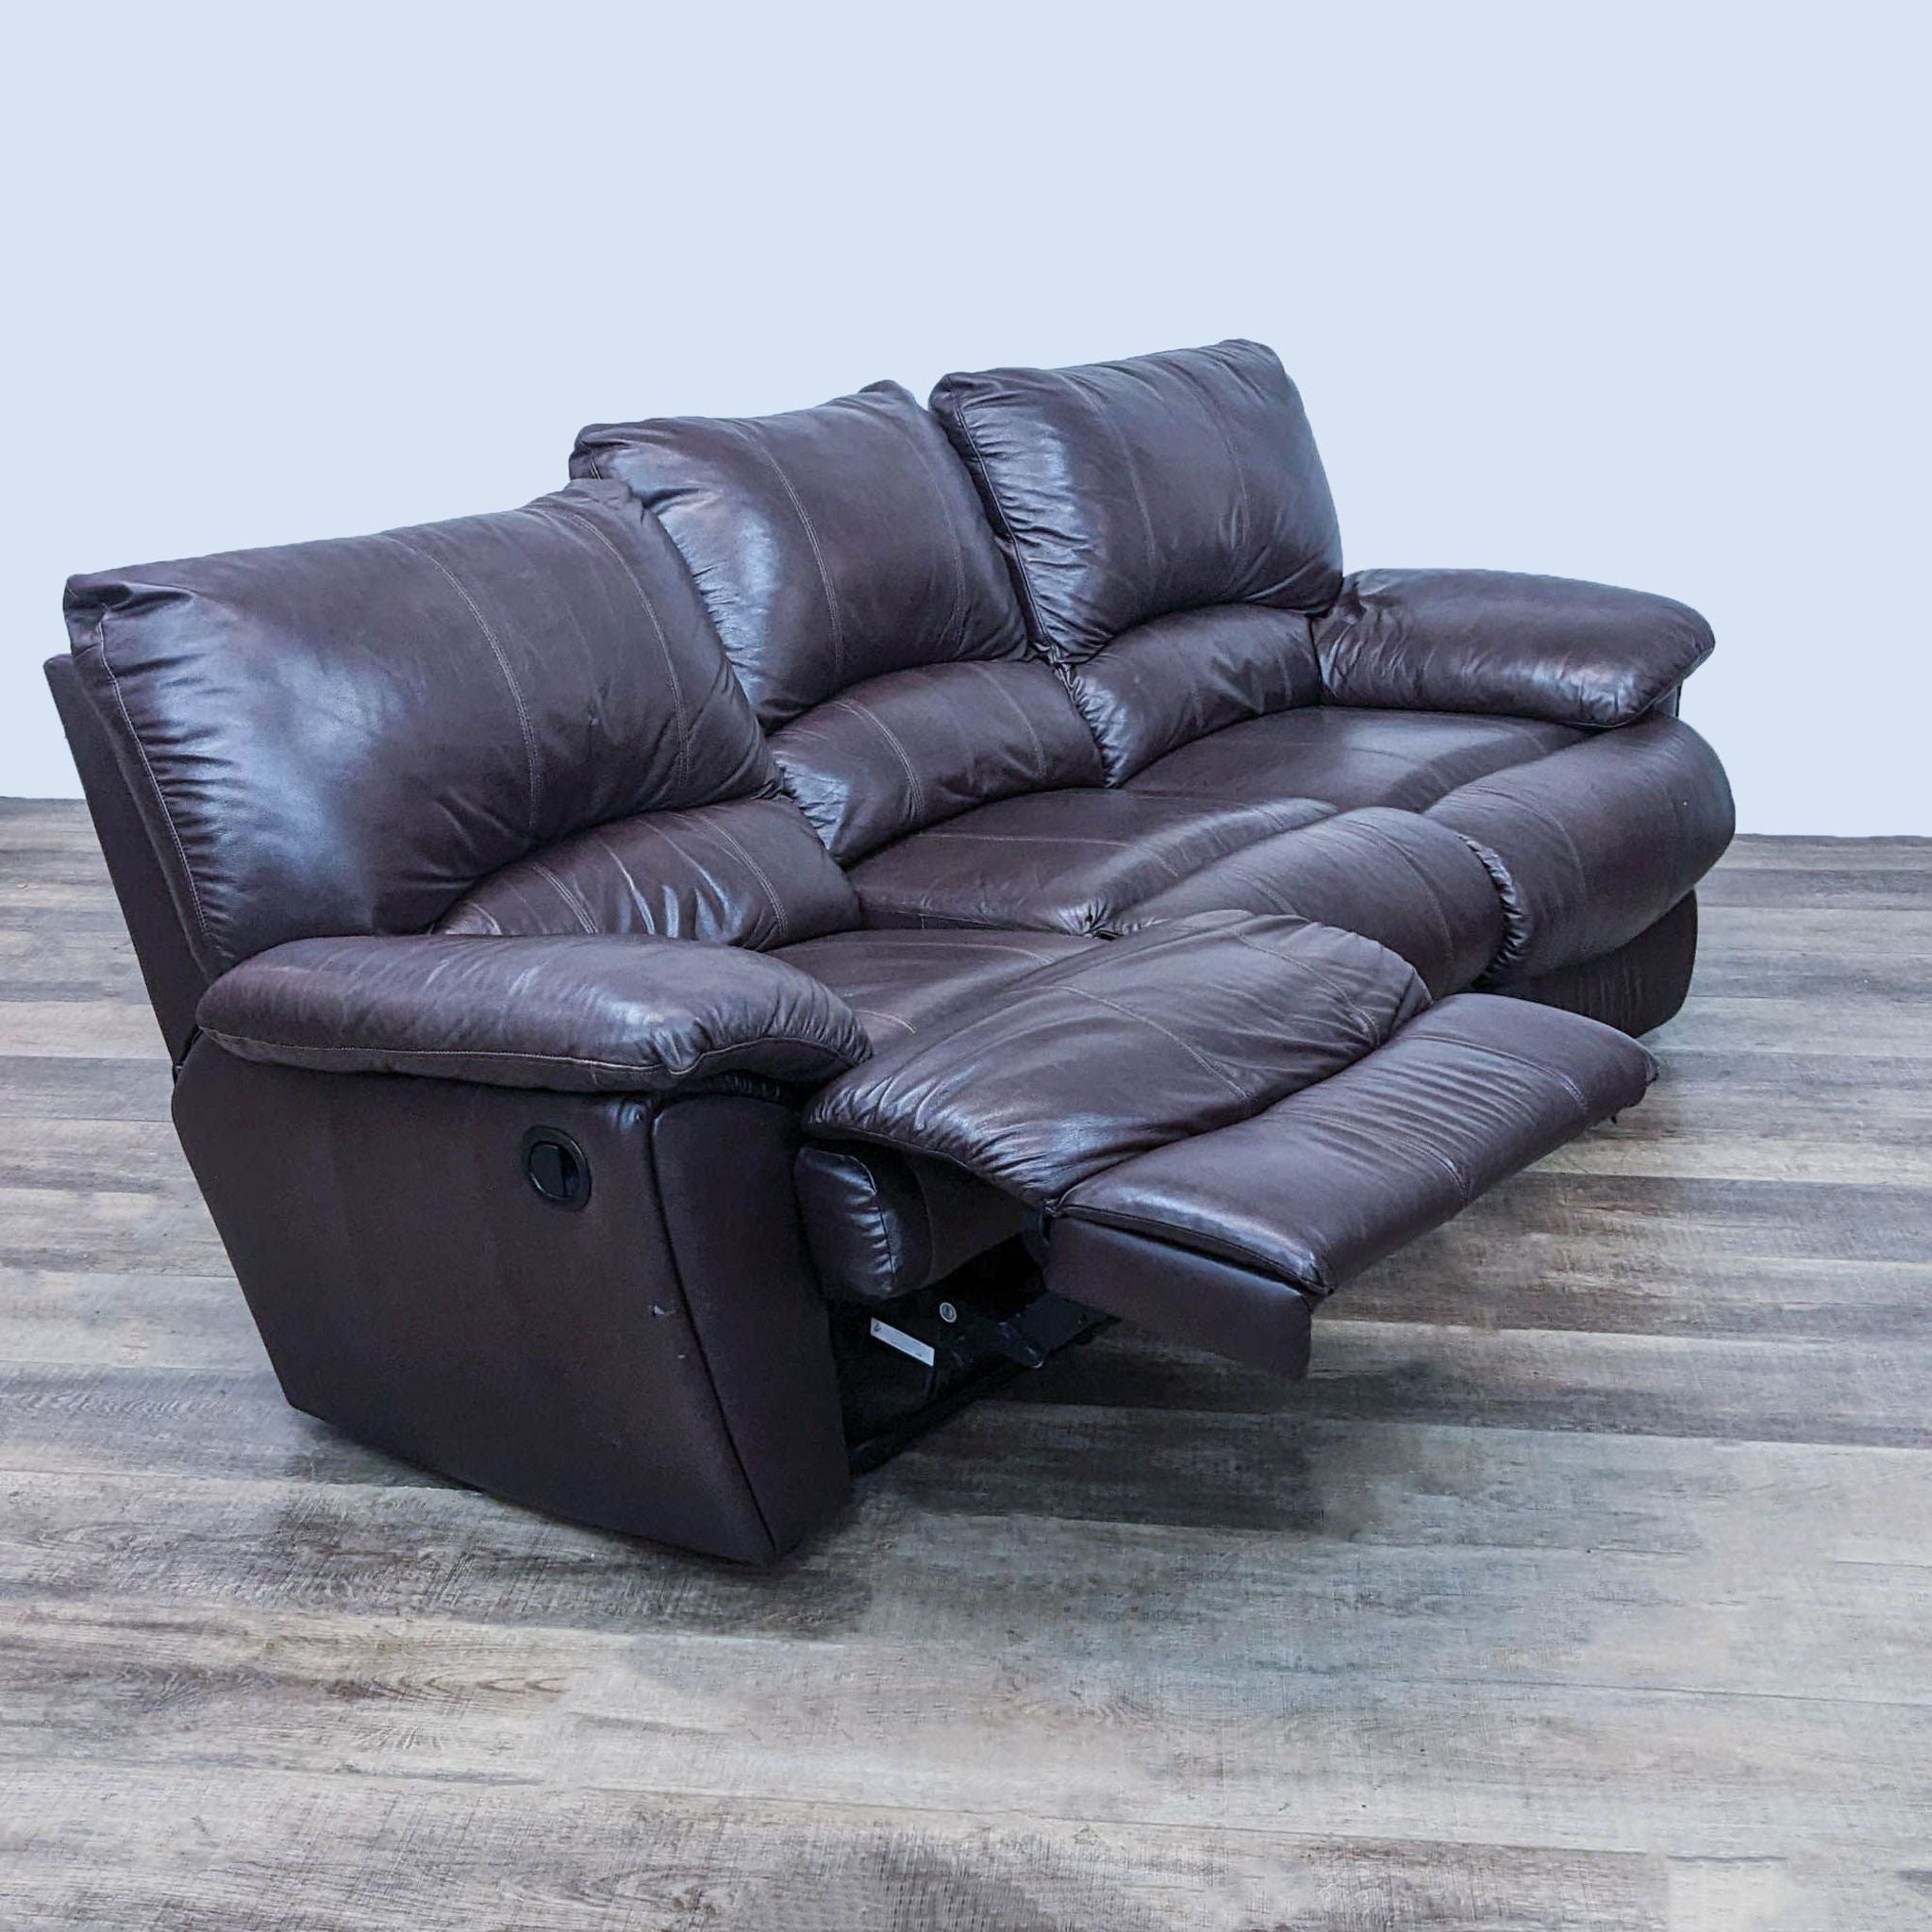 Reclined high back, dark brown, leather-look 3-seat sofa by Reperch with plush pillow-top arms on a wood-patterned floor.